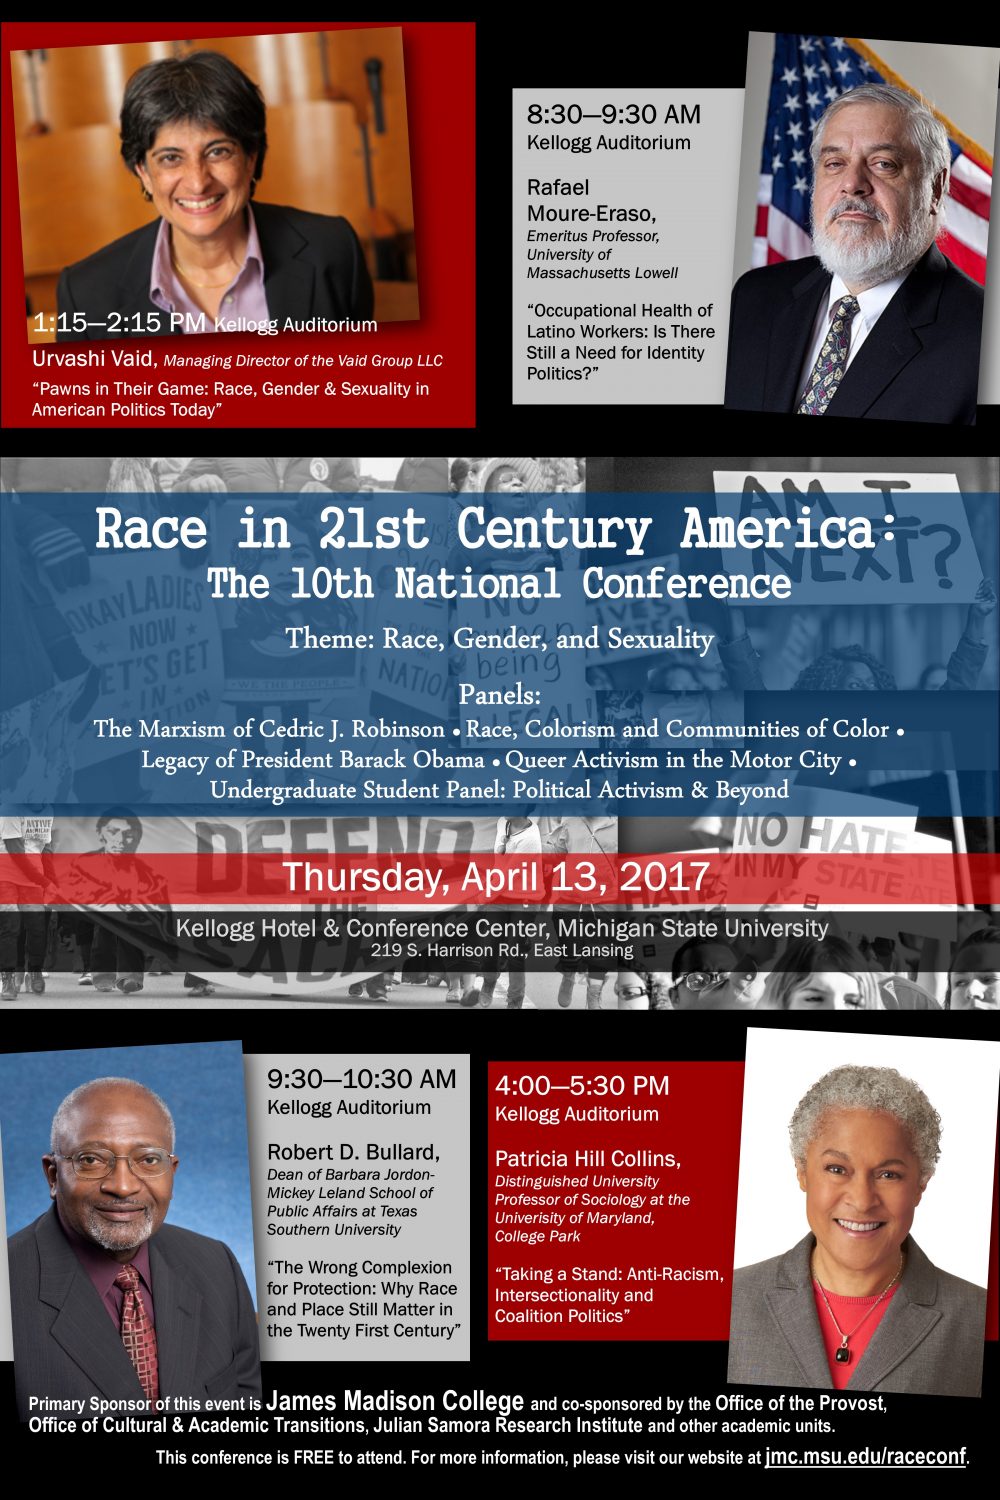 Race in 21st Century America: The 10th National Conference “Race, Gender, and Sexuality”